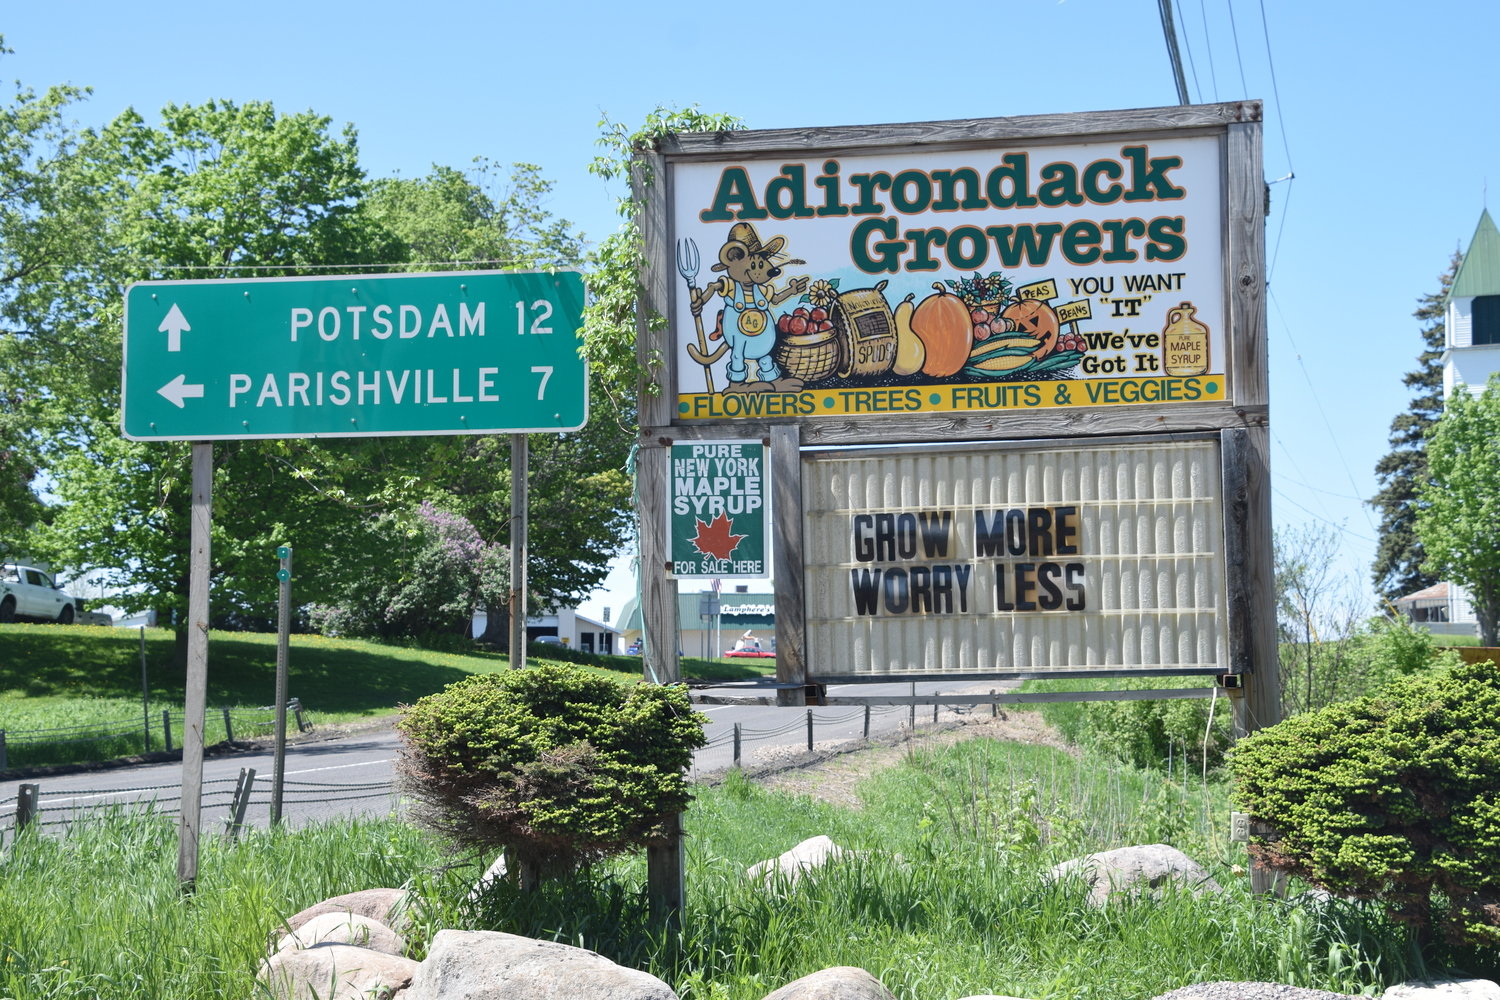 Adirondack Greenhouses, formerly known as Adirondack Growers, is located in Hopkinton, between Potsdam and Malone.